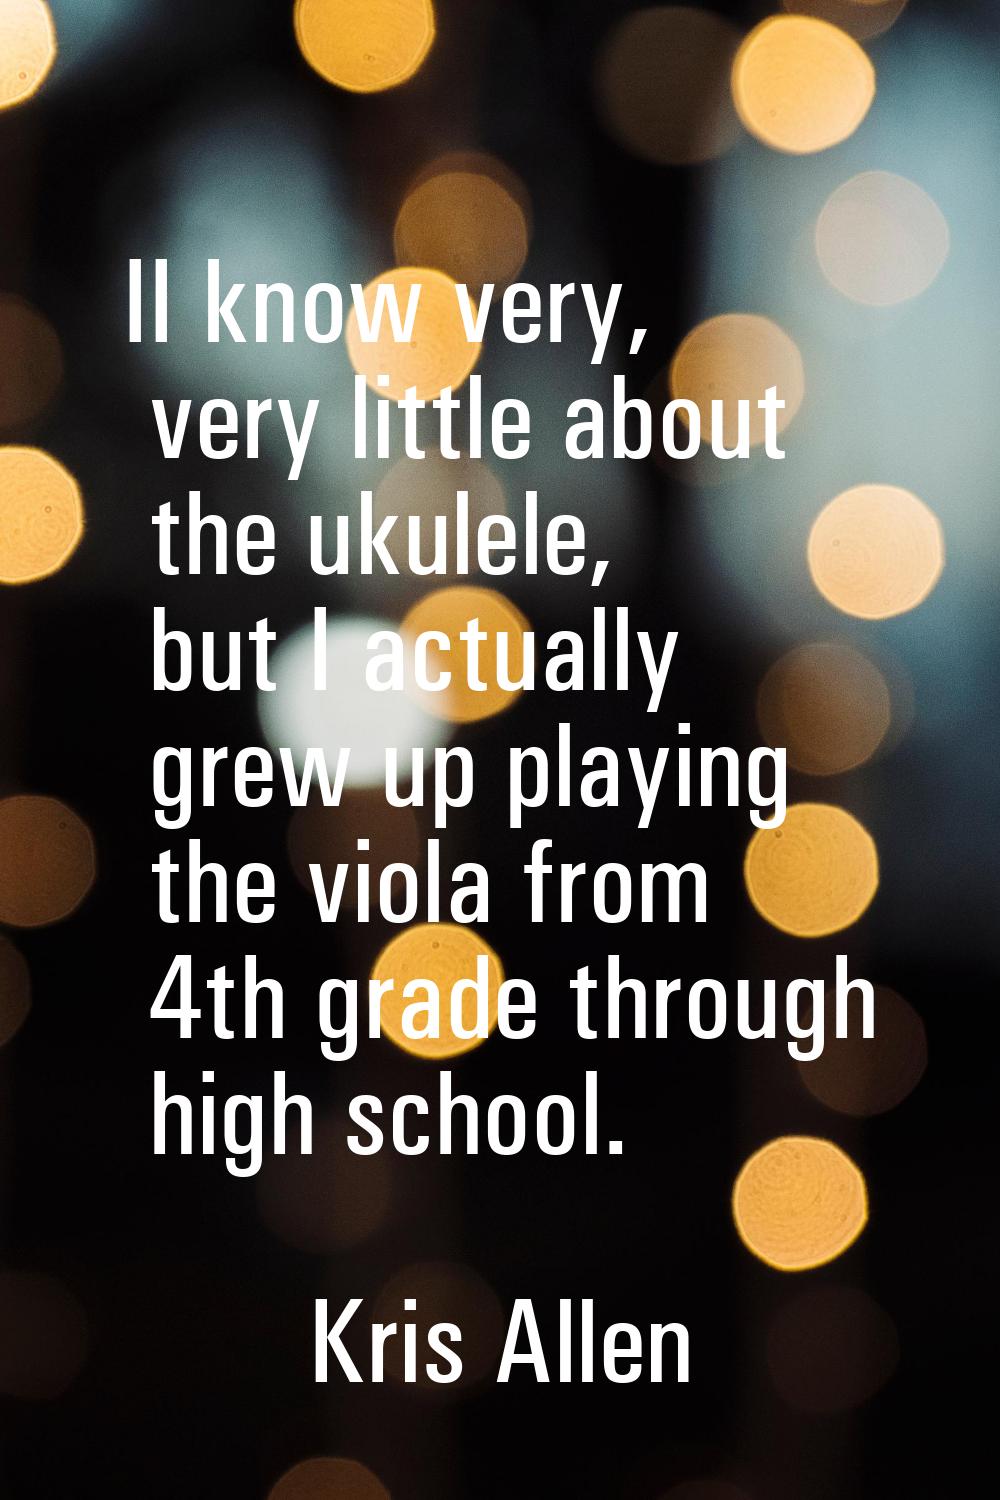 II know very, very little about the ukulele, but I actually grew up playing the viola from 4th grad